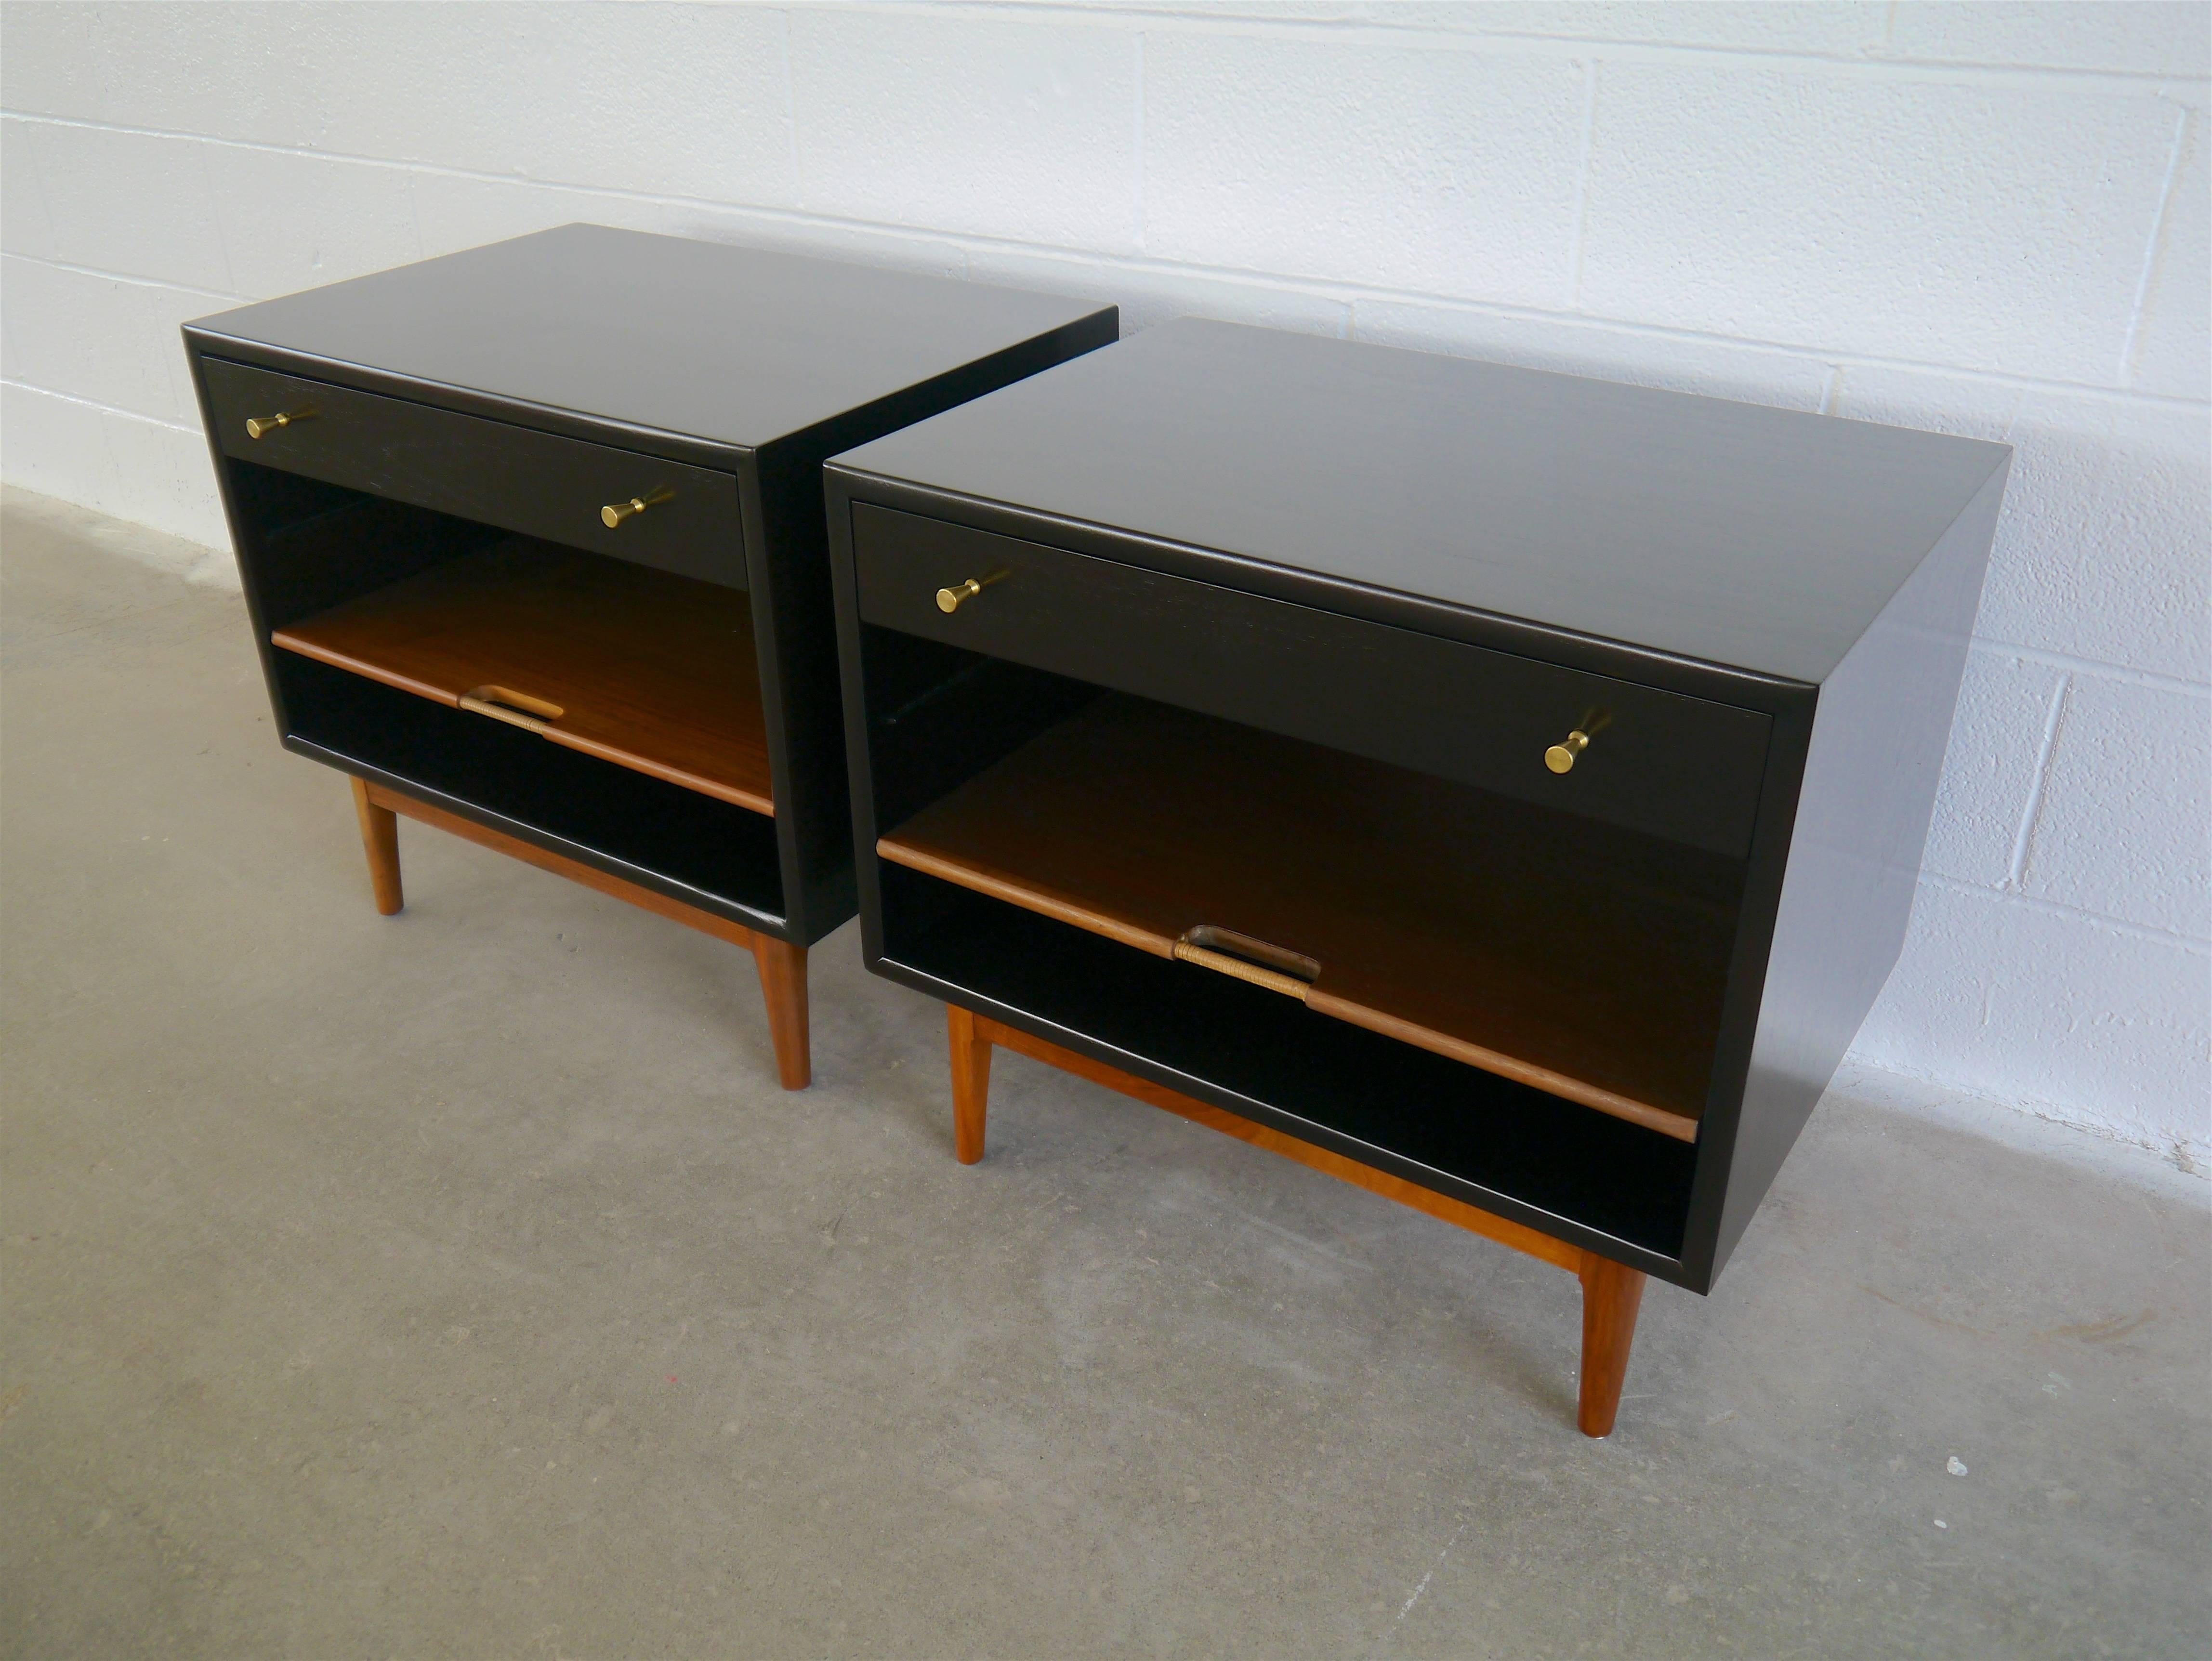 Nightstands in walnut by Kipp Stewart for Drexel. These large nightstands have drawers and an adjustable sliding shelf with raffia handles. The pulls are solid machined brass. We borrowed the finish from Dunbar pieces of the period, the cases done